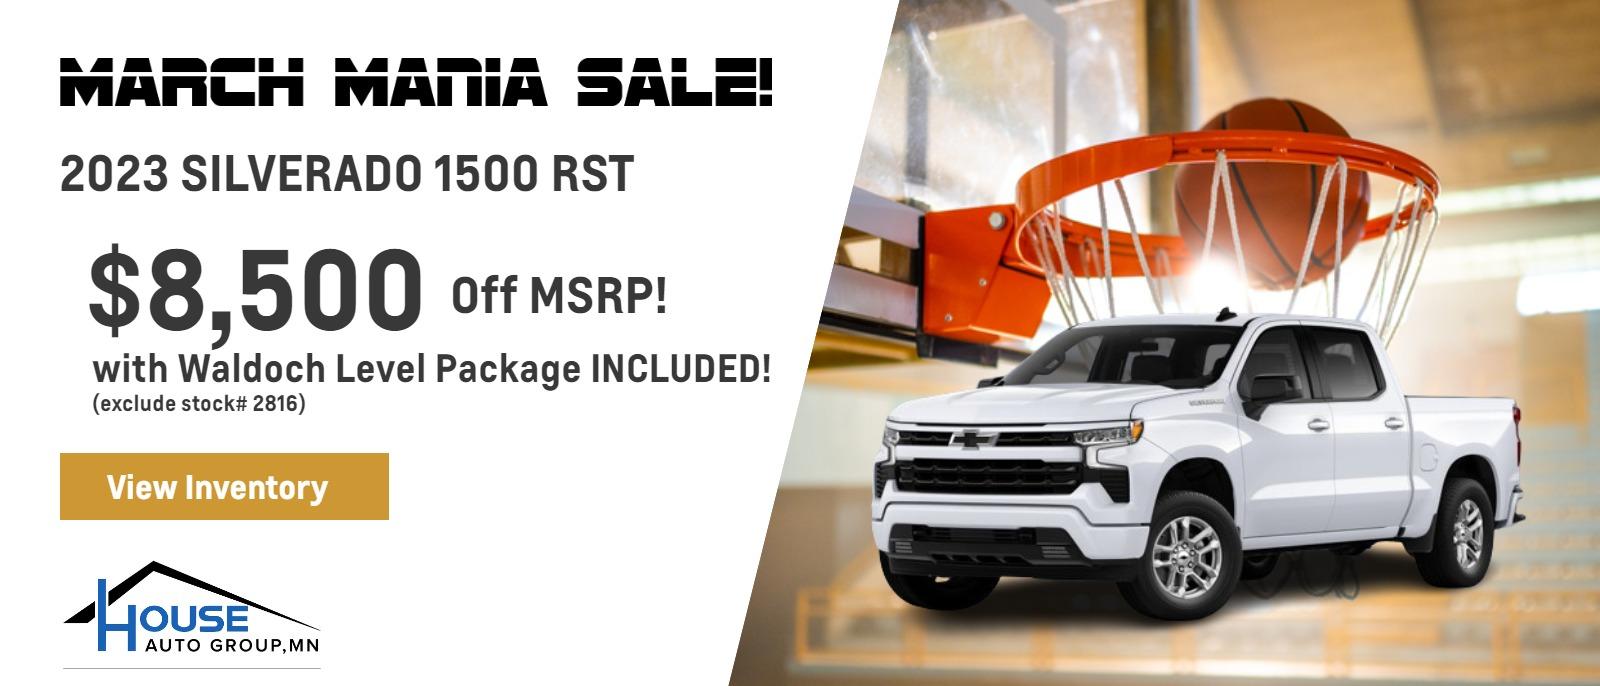 2023 Silverado 1500 RST - $8,500 Off MSRP with Waldoch Level Package INCLUDED! (exclude stock# 2816)